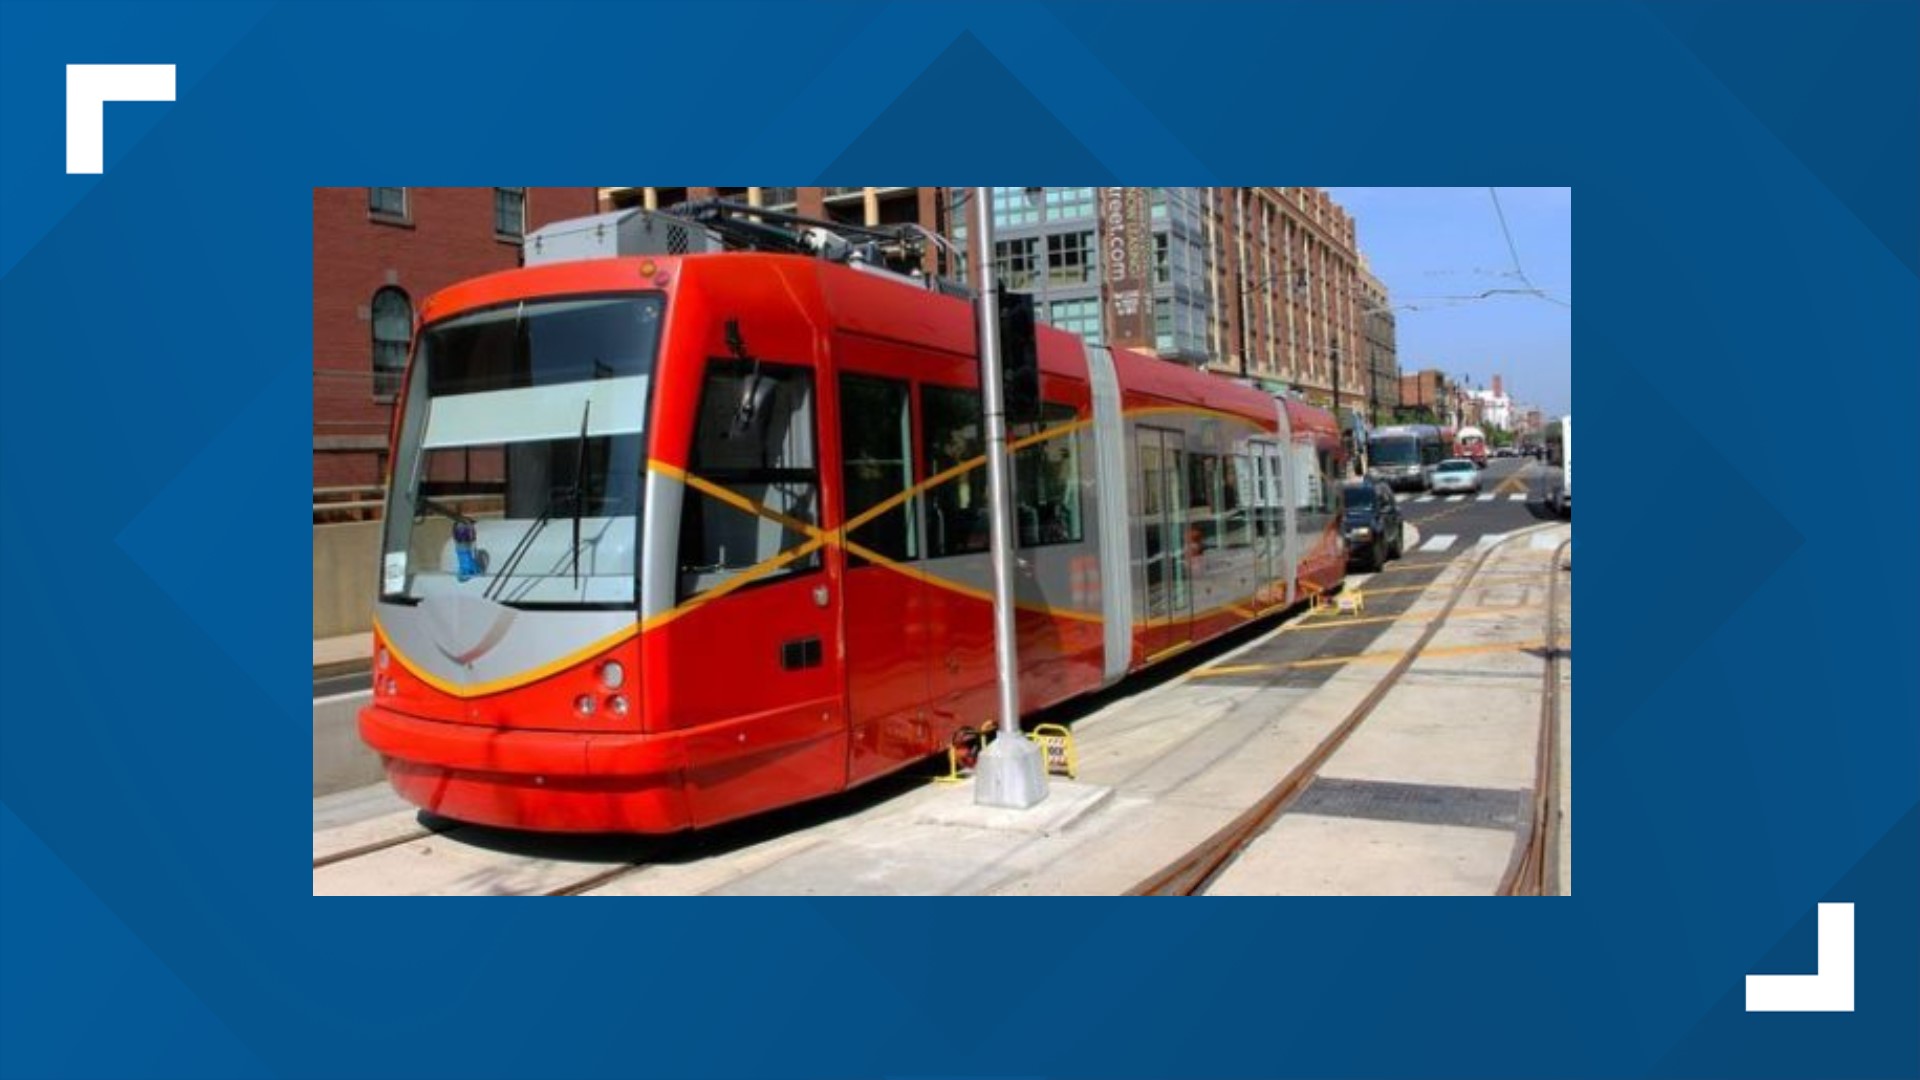 Business owners who managed to keep their doors open amid rising operation costs and changing consumer habits, were told the Streetcar would help generate business. When we asked those business owners, we got mixed reviews.